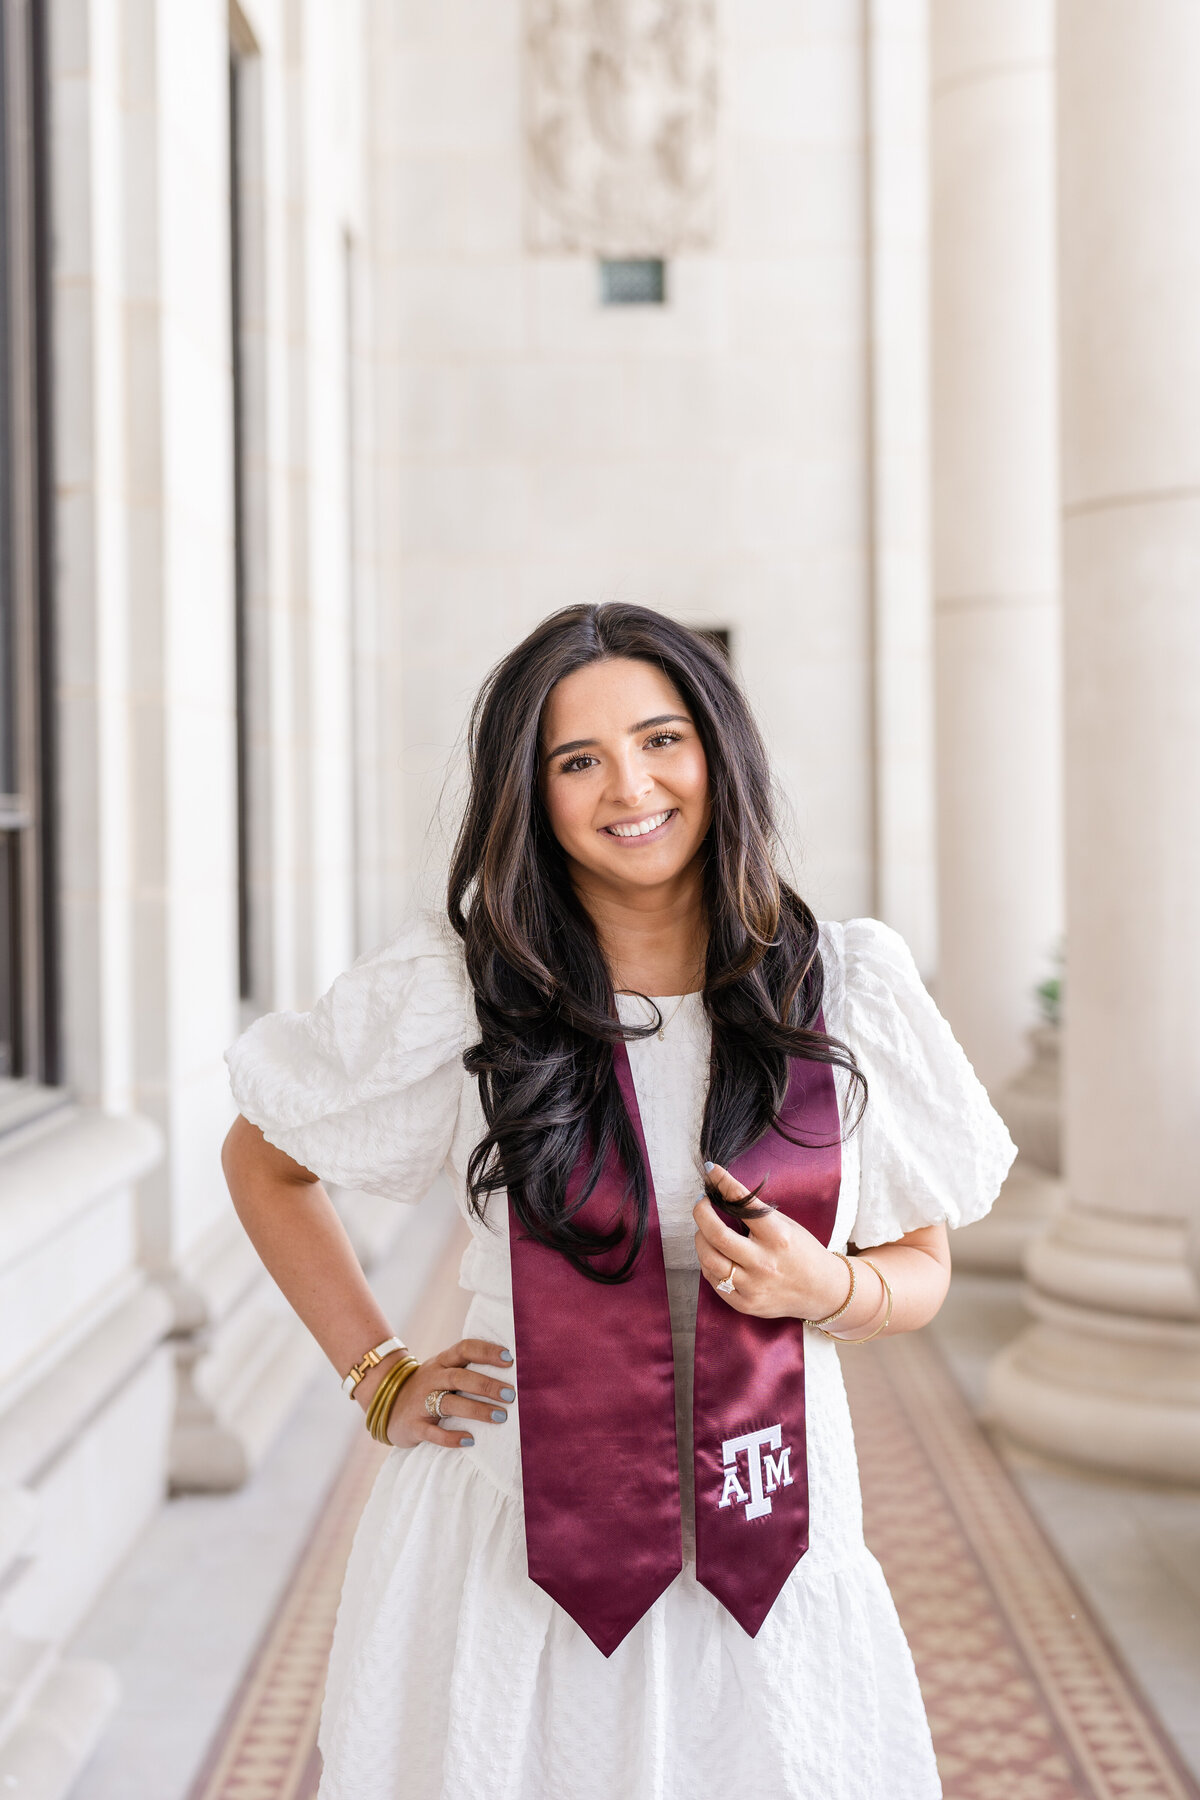 Texas A&M senior girl holding Aggie stole and smiling with hand on hip and wearing white dress in columns of the Administration Building